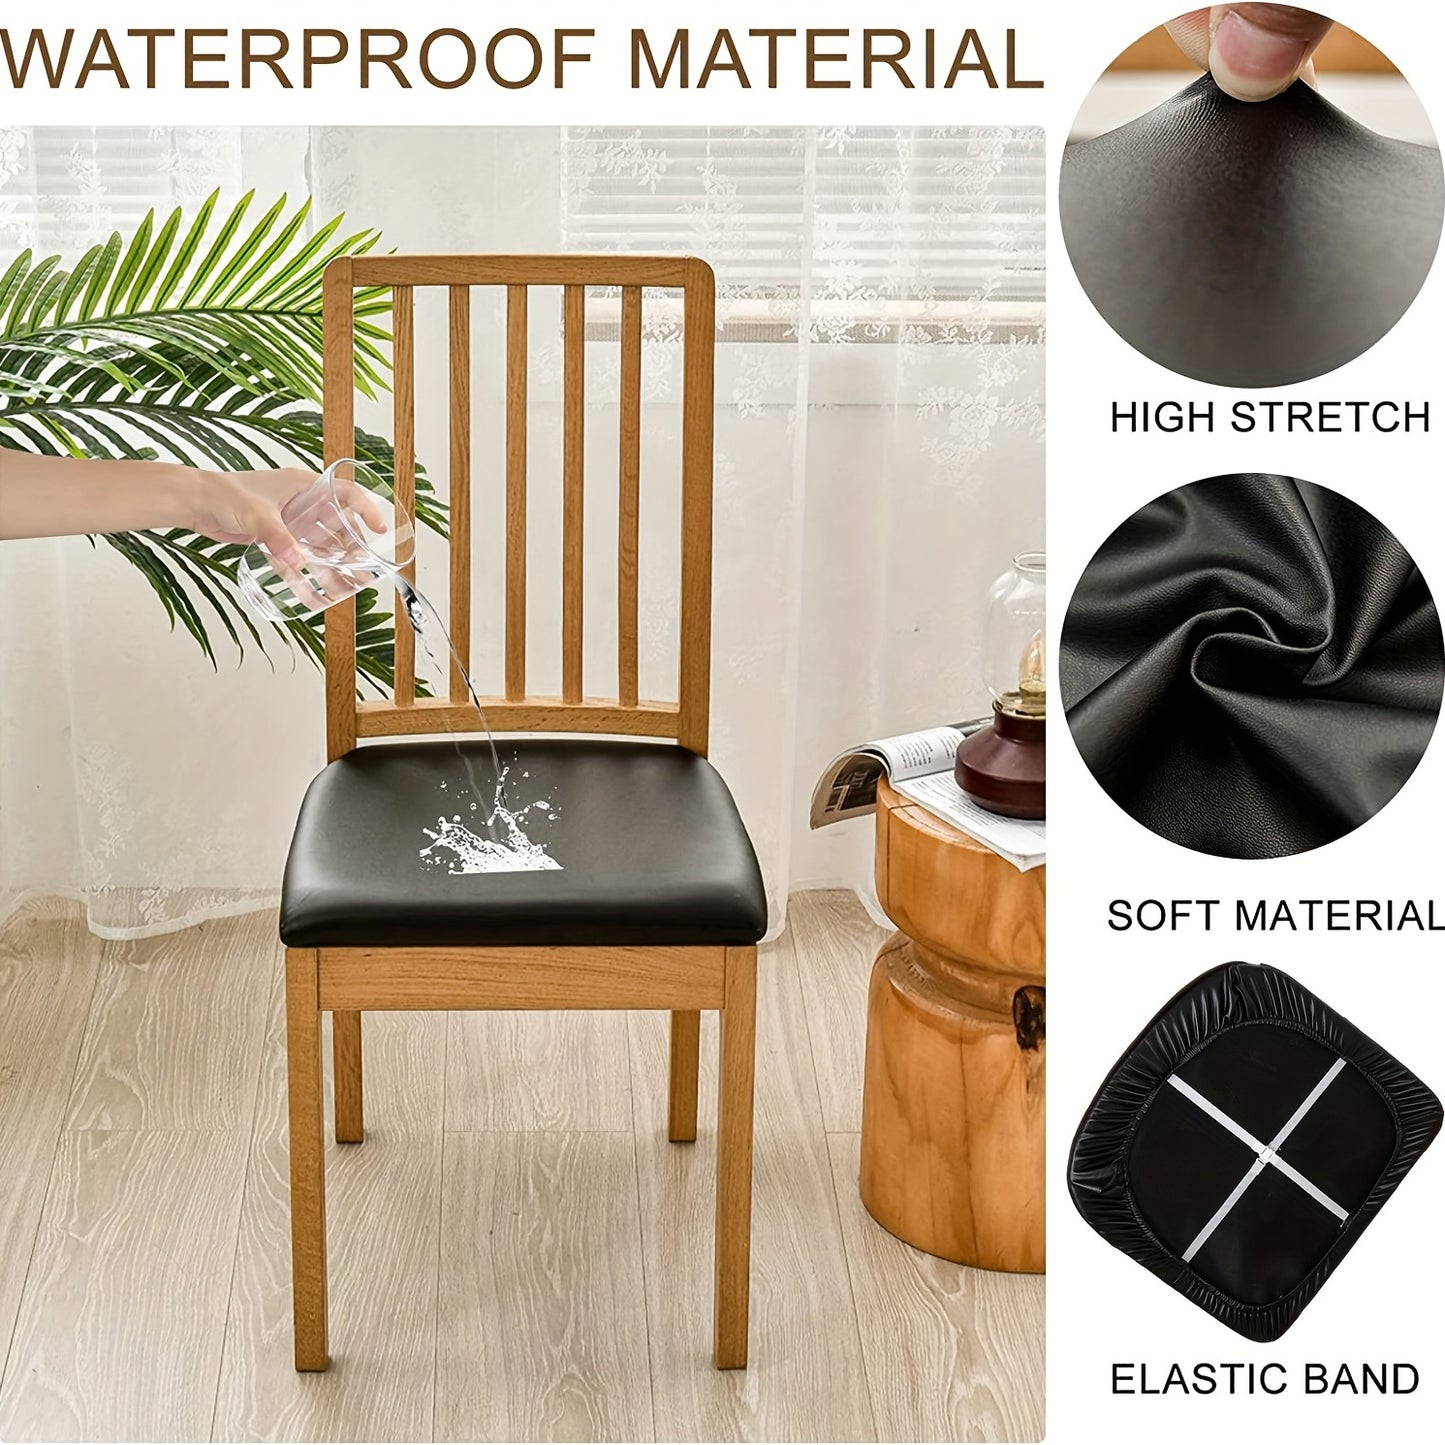 Set of 4/6 Waterproof PU Leather Dining Chair Covers, Square PU Leather Chair Cushion Cover for Dining Room, Kitchen, Hotel Seat Covers, Removable Padded Chair Protector Covers, Home Decor 'interior 